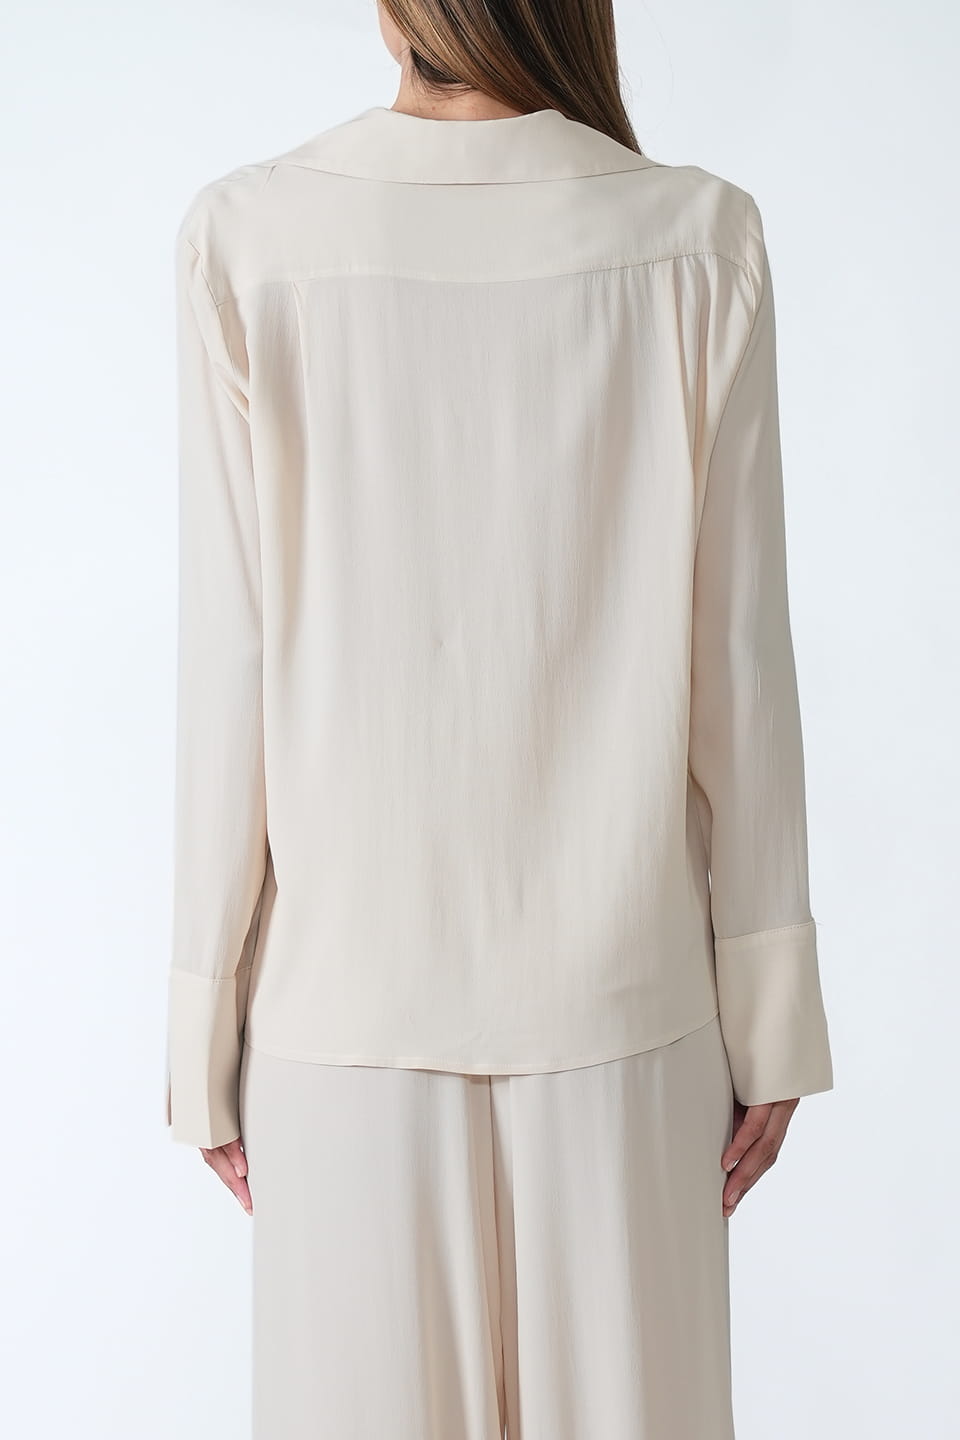 Thumbnail for Product gallery 6, Shirt with Slip on the Sleeve Ivory